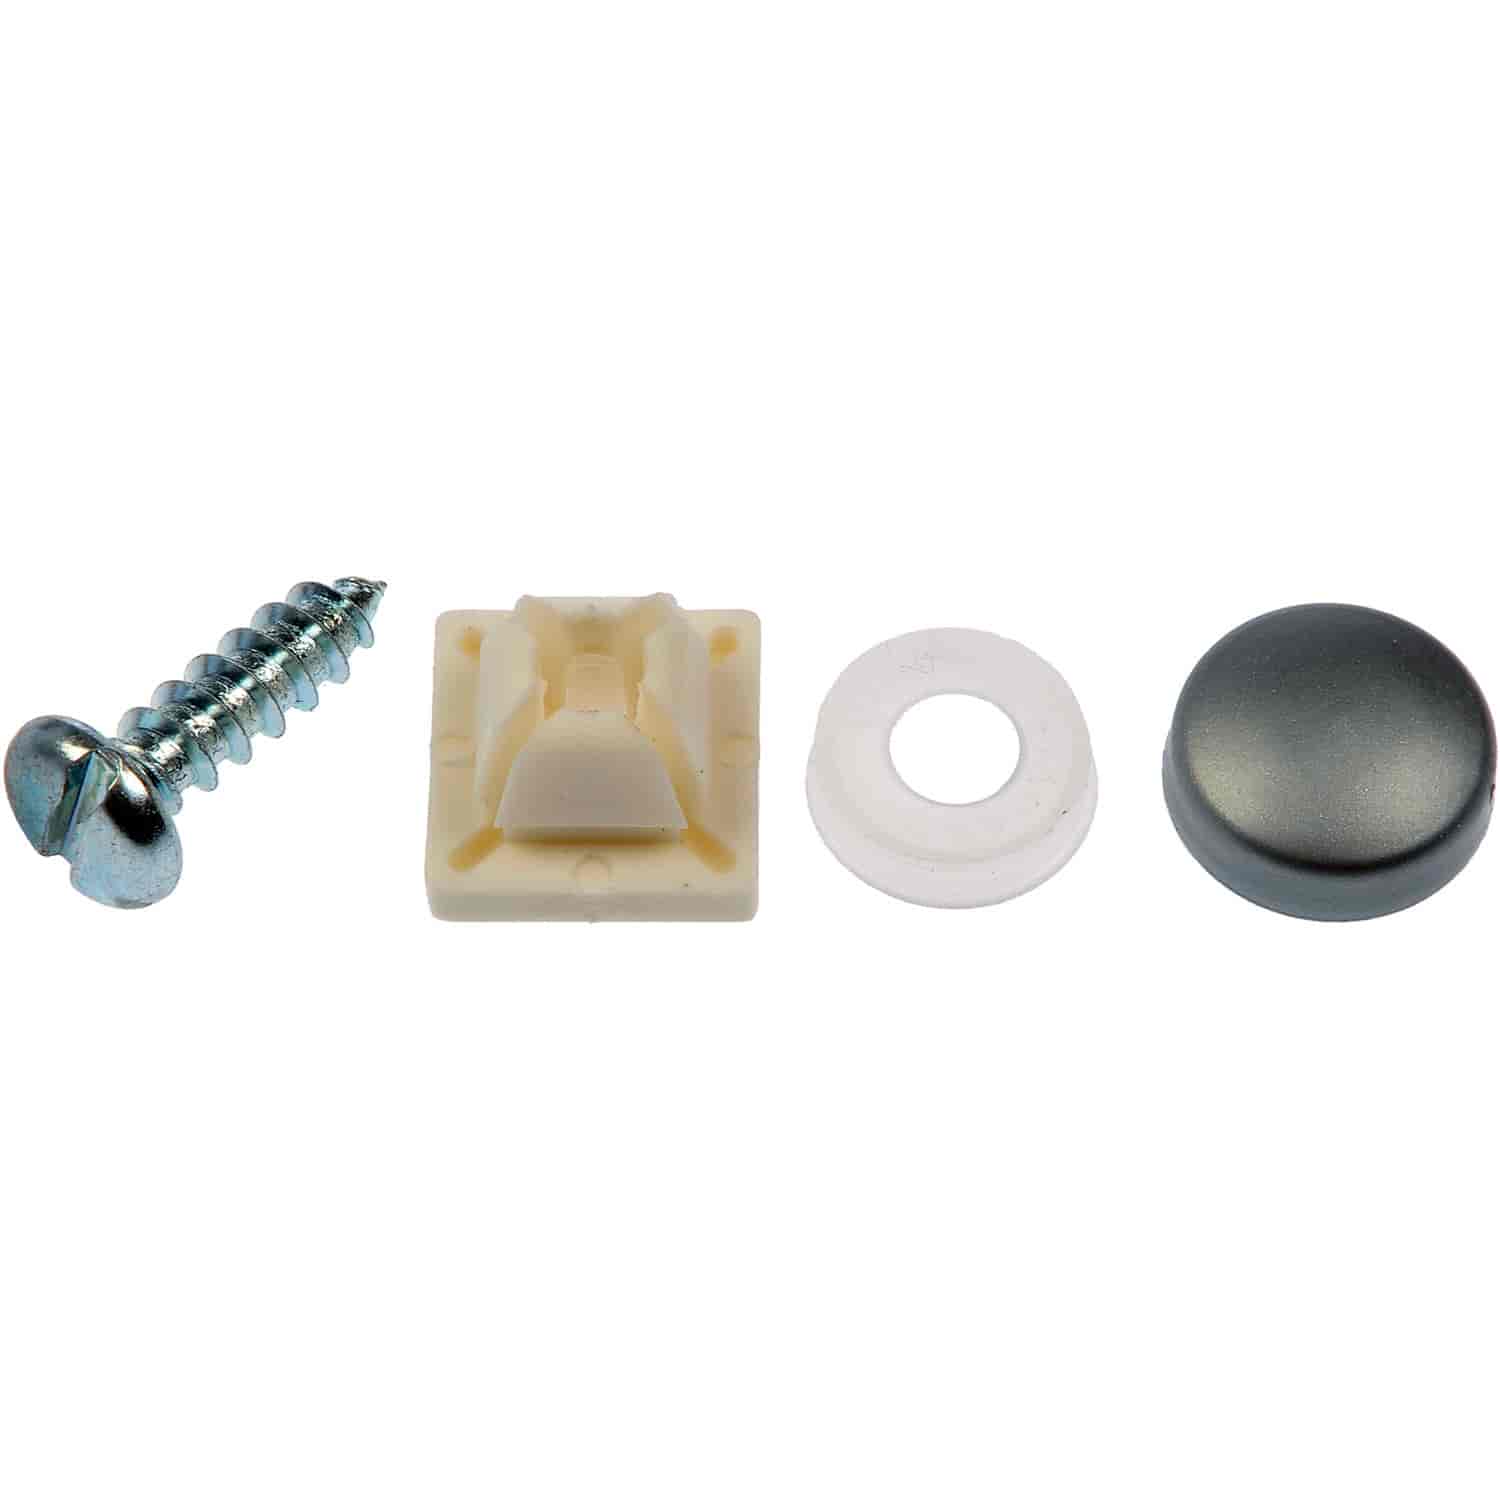 License Plate Fasteners- No. 12 x 3/4 In.